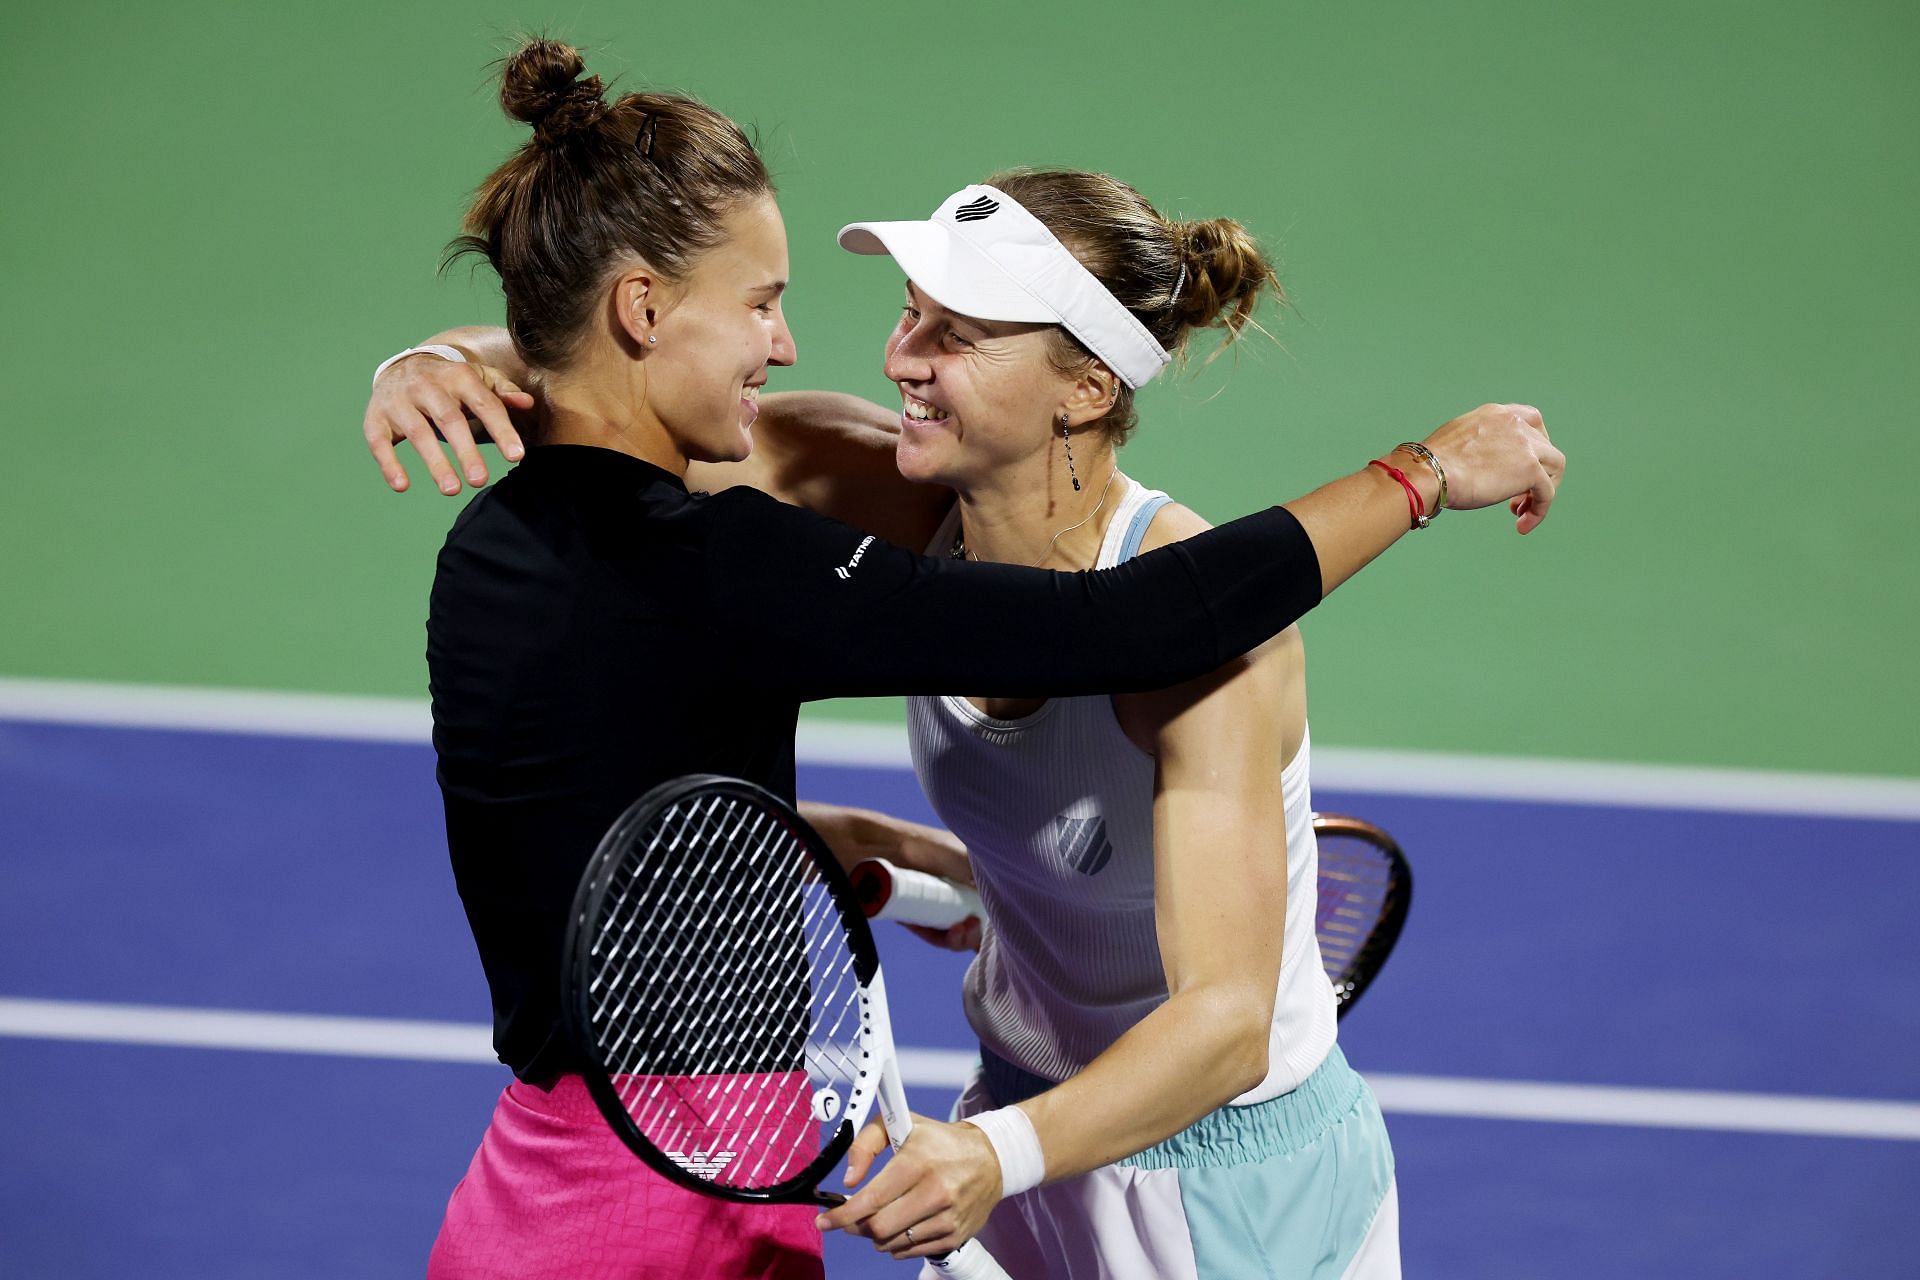 Dubai Tennis Championships 2023: Women's draw, schedule, players, prize  money breakdown and more